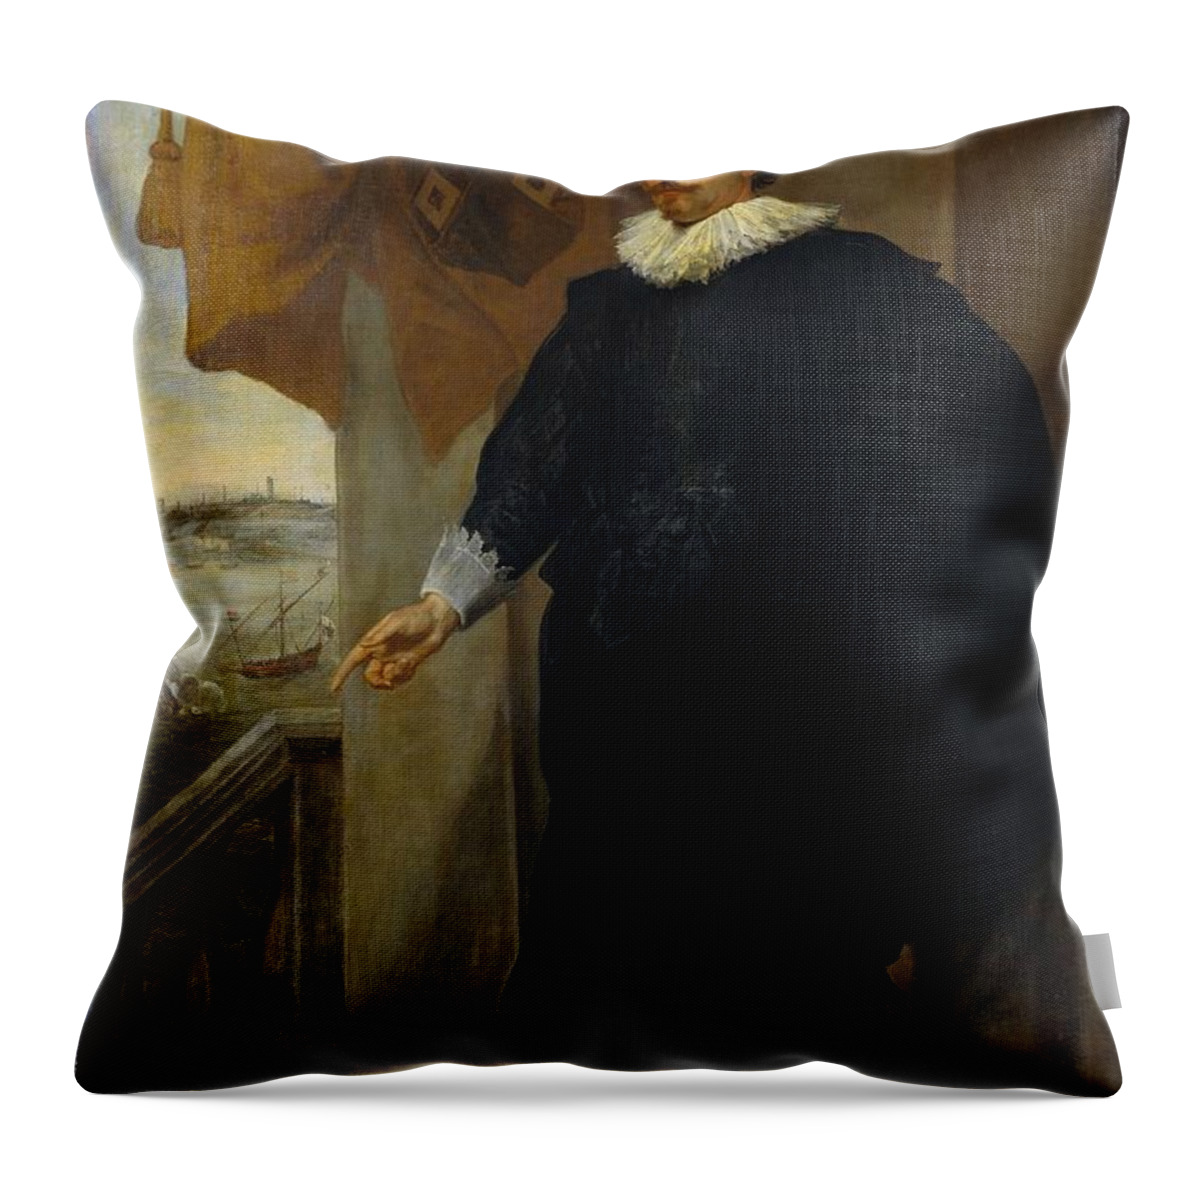 Nicolaes Van Der Borght Throw Pillow featuring the painting Nicolaes van der Borght, Merchant of Antwerp by Vincent Monozlay